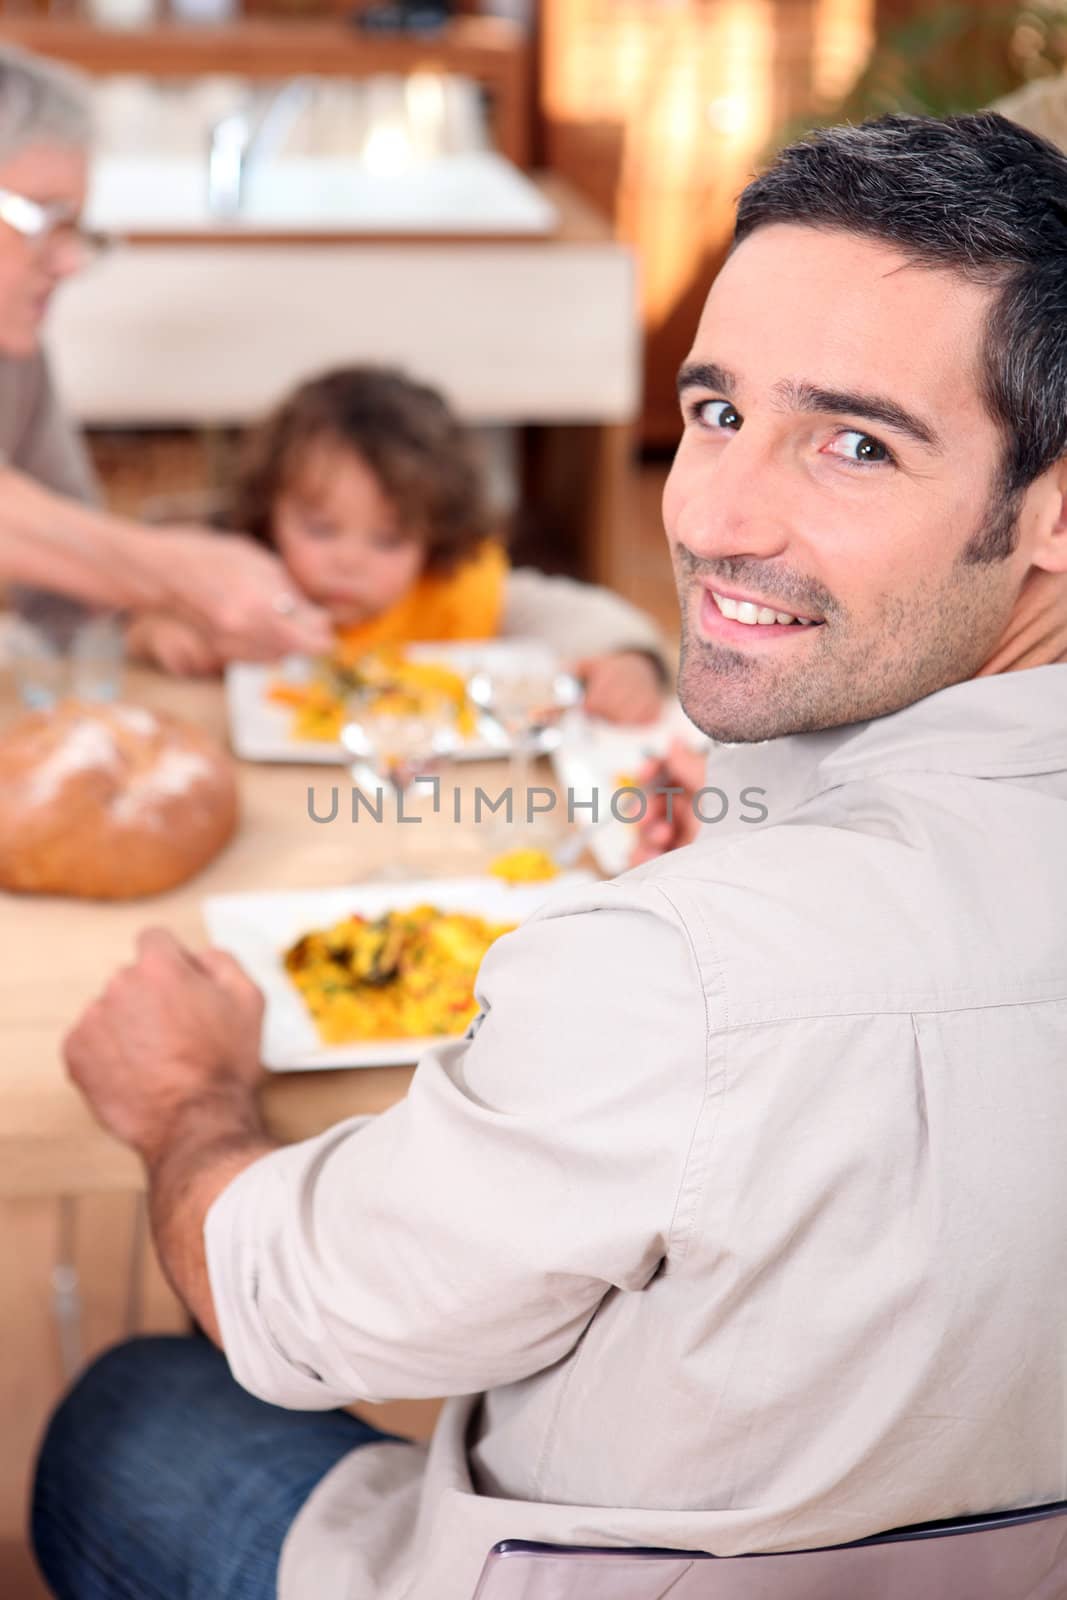 Family gathered around kitchen table by phovoir